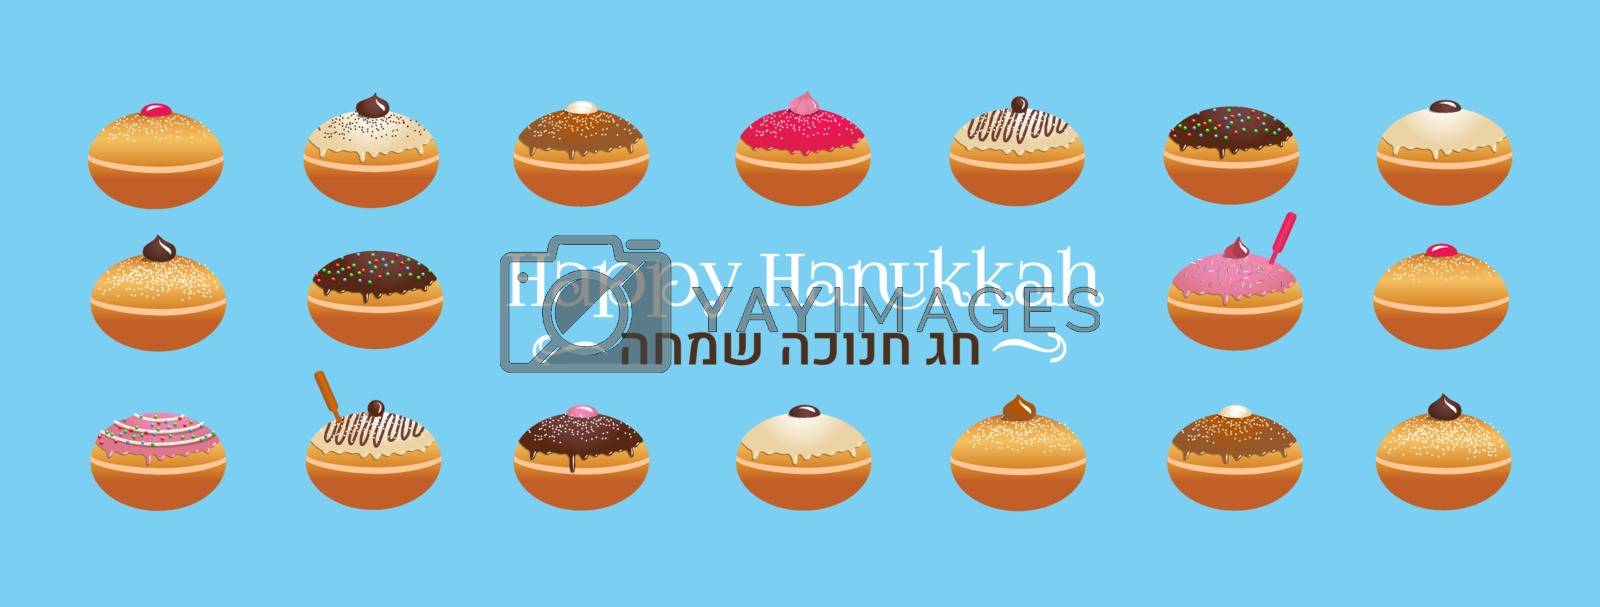 Royalty free image of Traditional Hanukkah, Jewish holiday doughnut with different frosting vector set. by Sofir